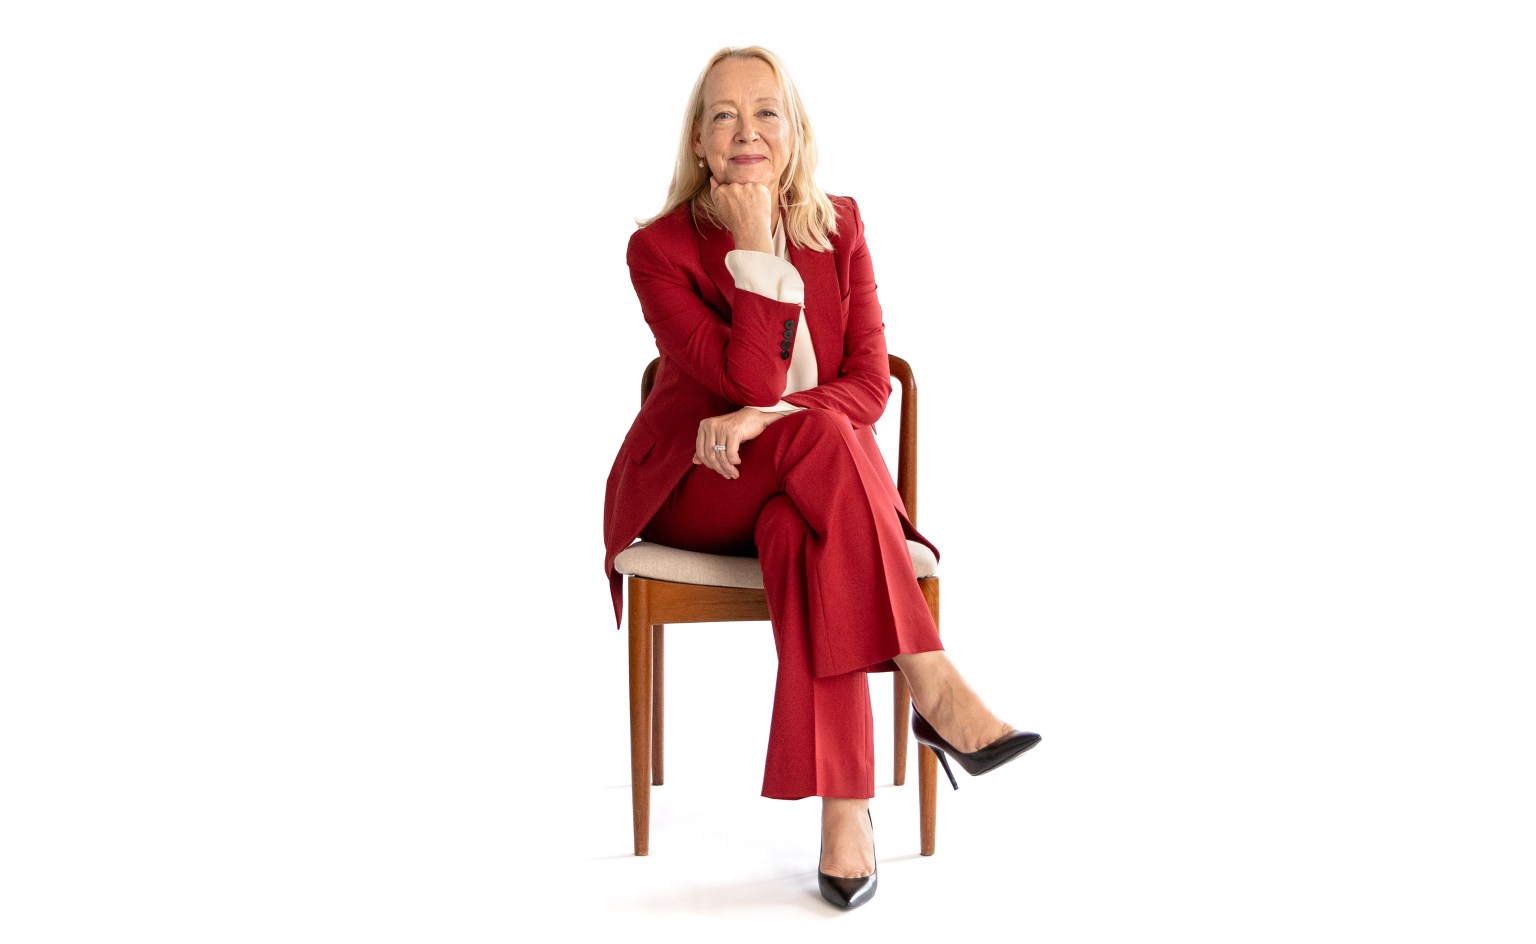 A woman in a red suit sitting on a chair.